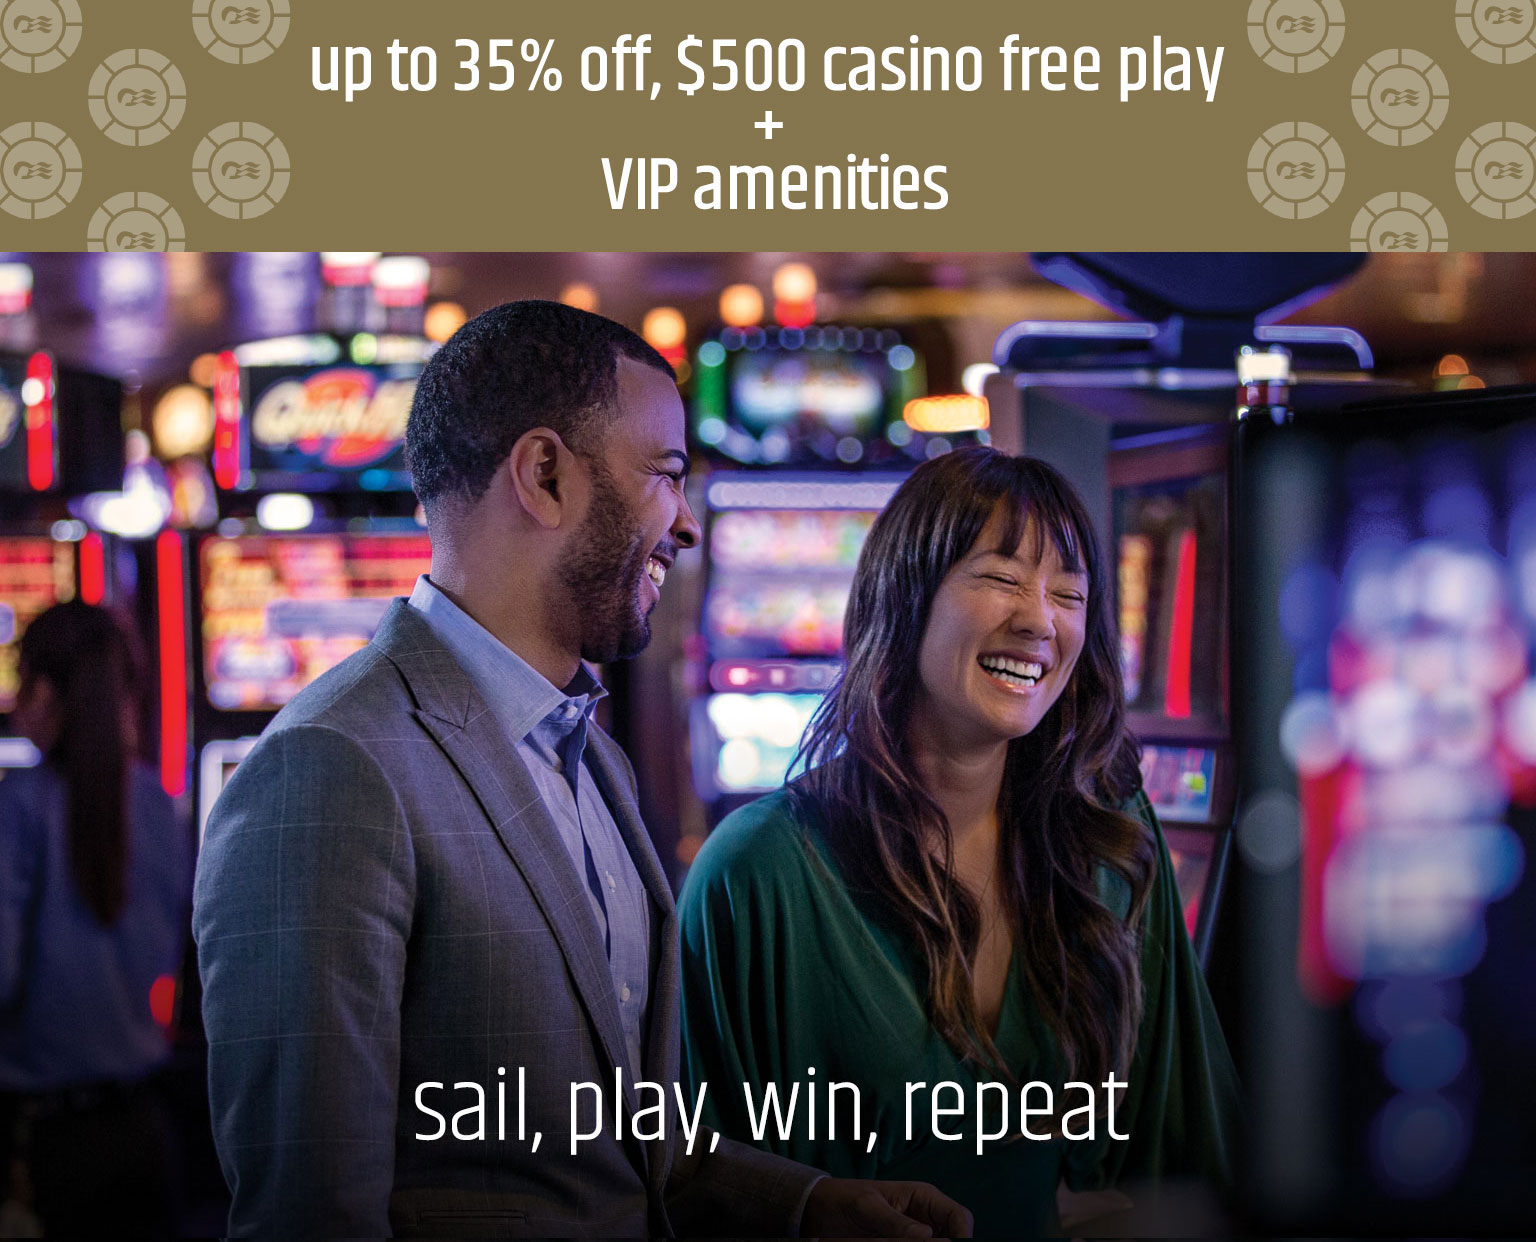 Up to 35% off, $500 casino free play & VIP amenities